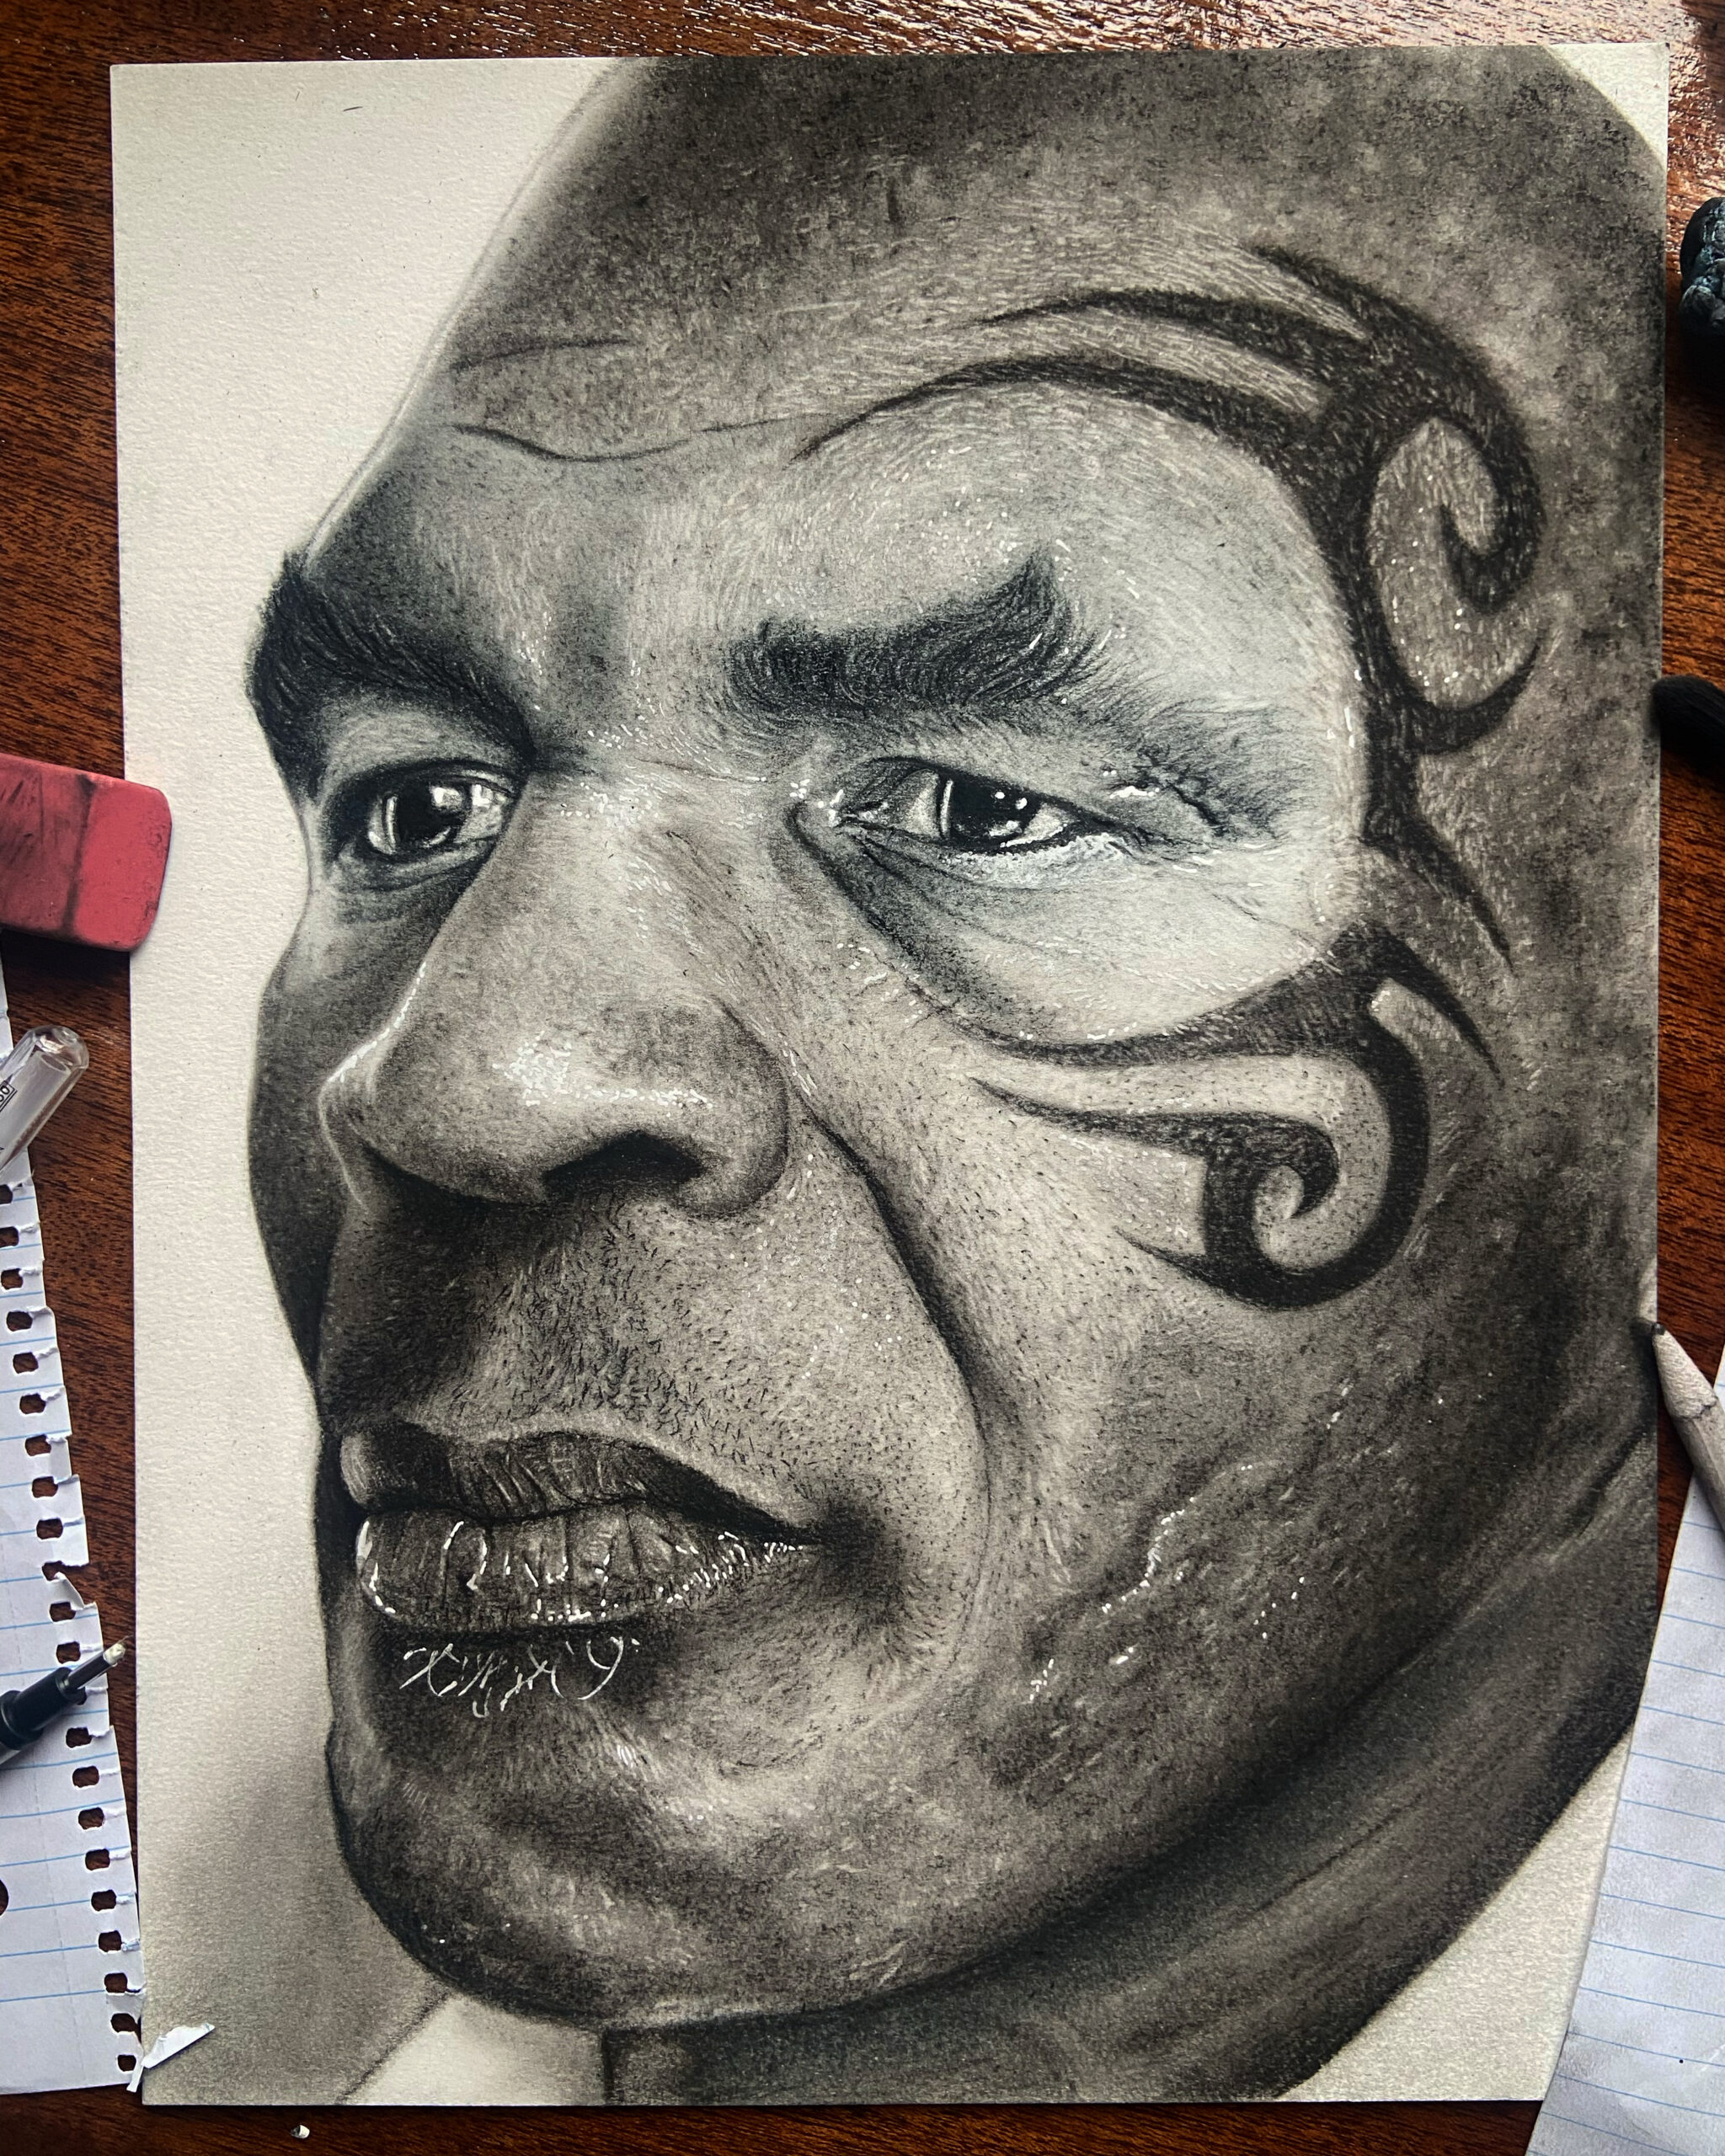 Drawing Mike Tyson as a kid versus now